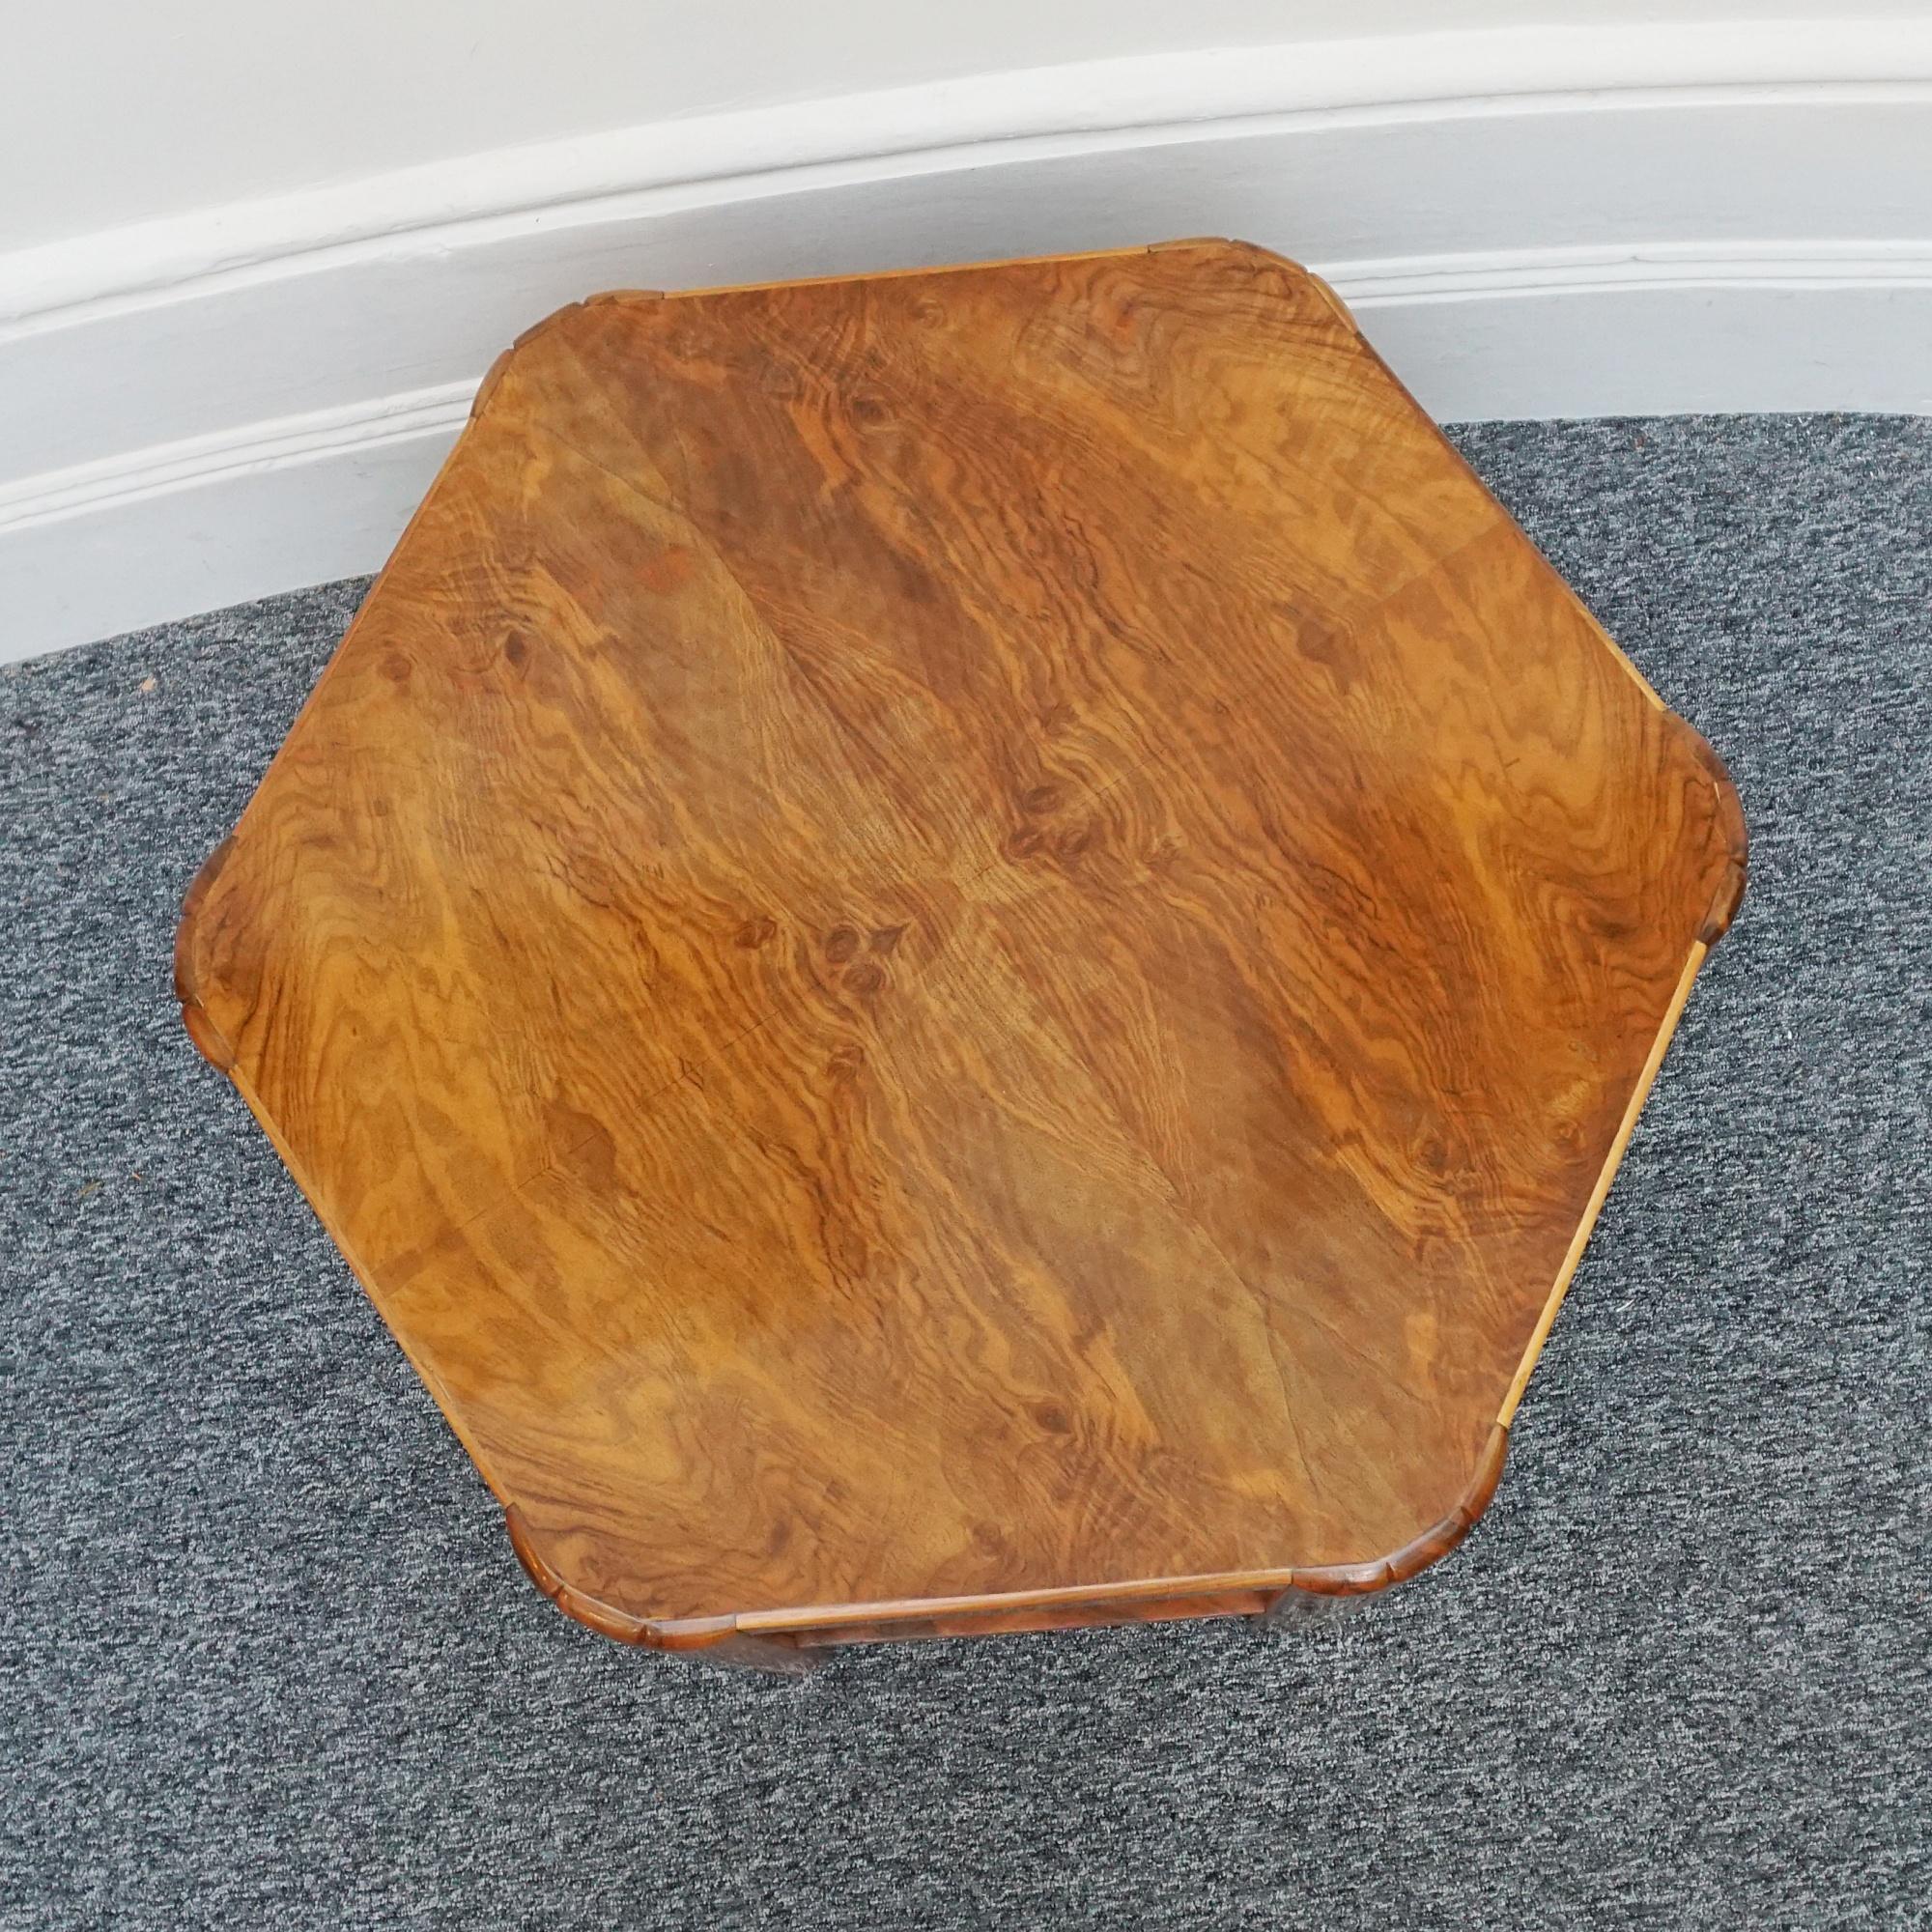 Original Art Deco Side Table by Heal's of London 1